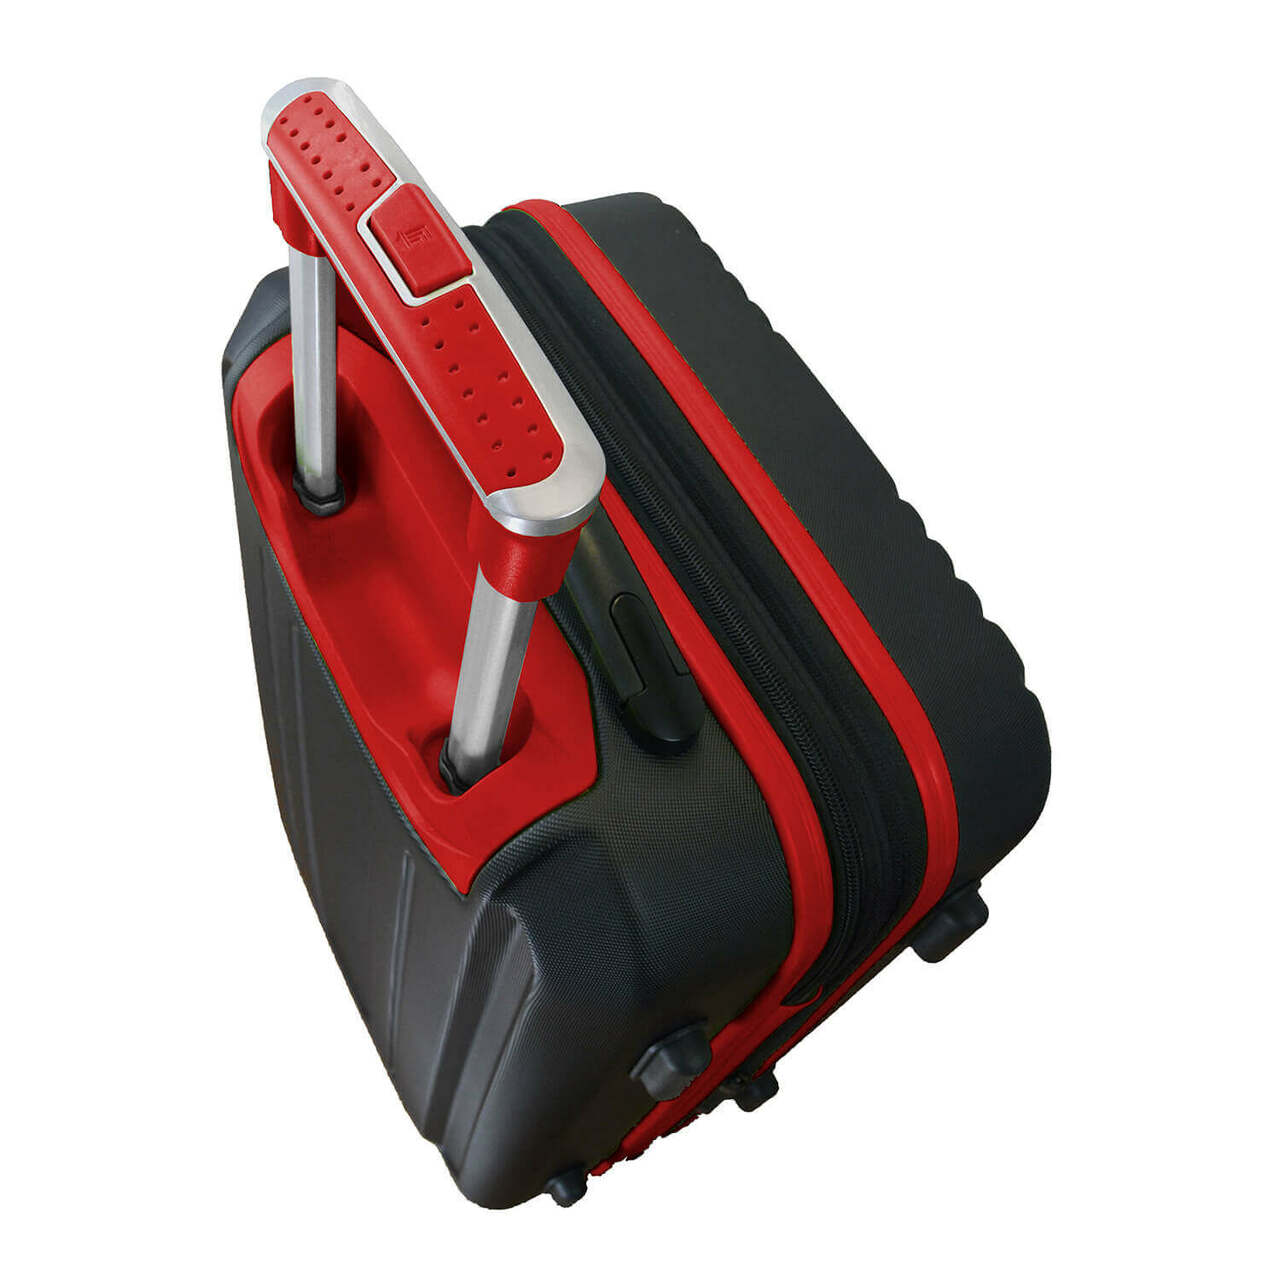 Kansas City Chiefs Hardcase Two-Tone Luggage Carry-on Spinner in Red